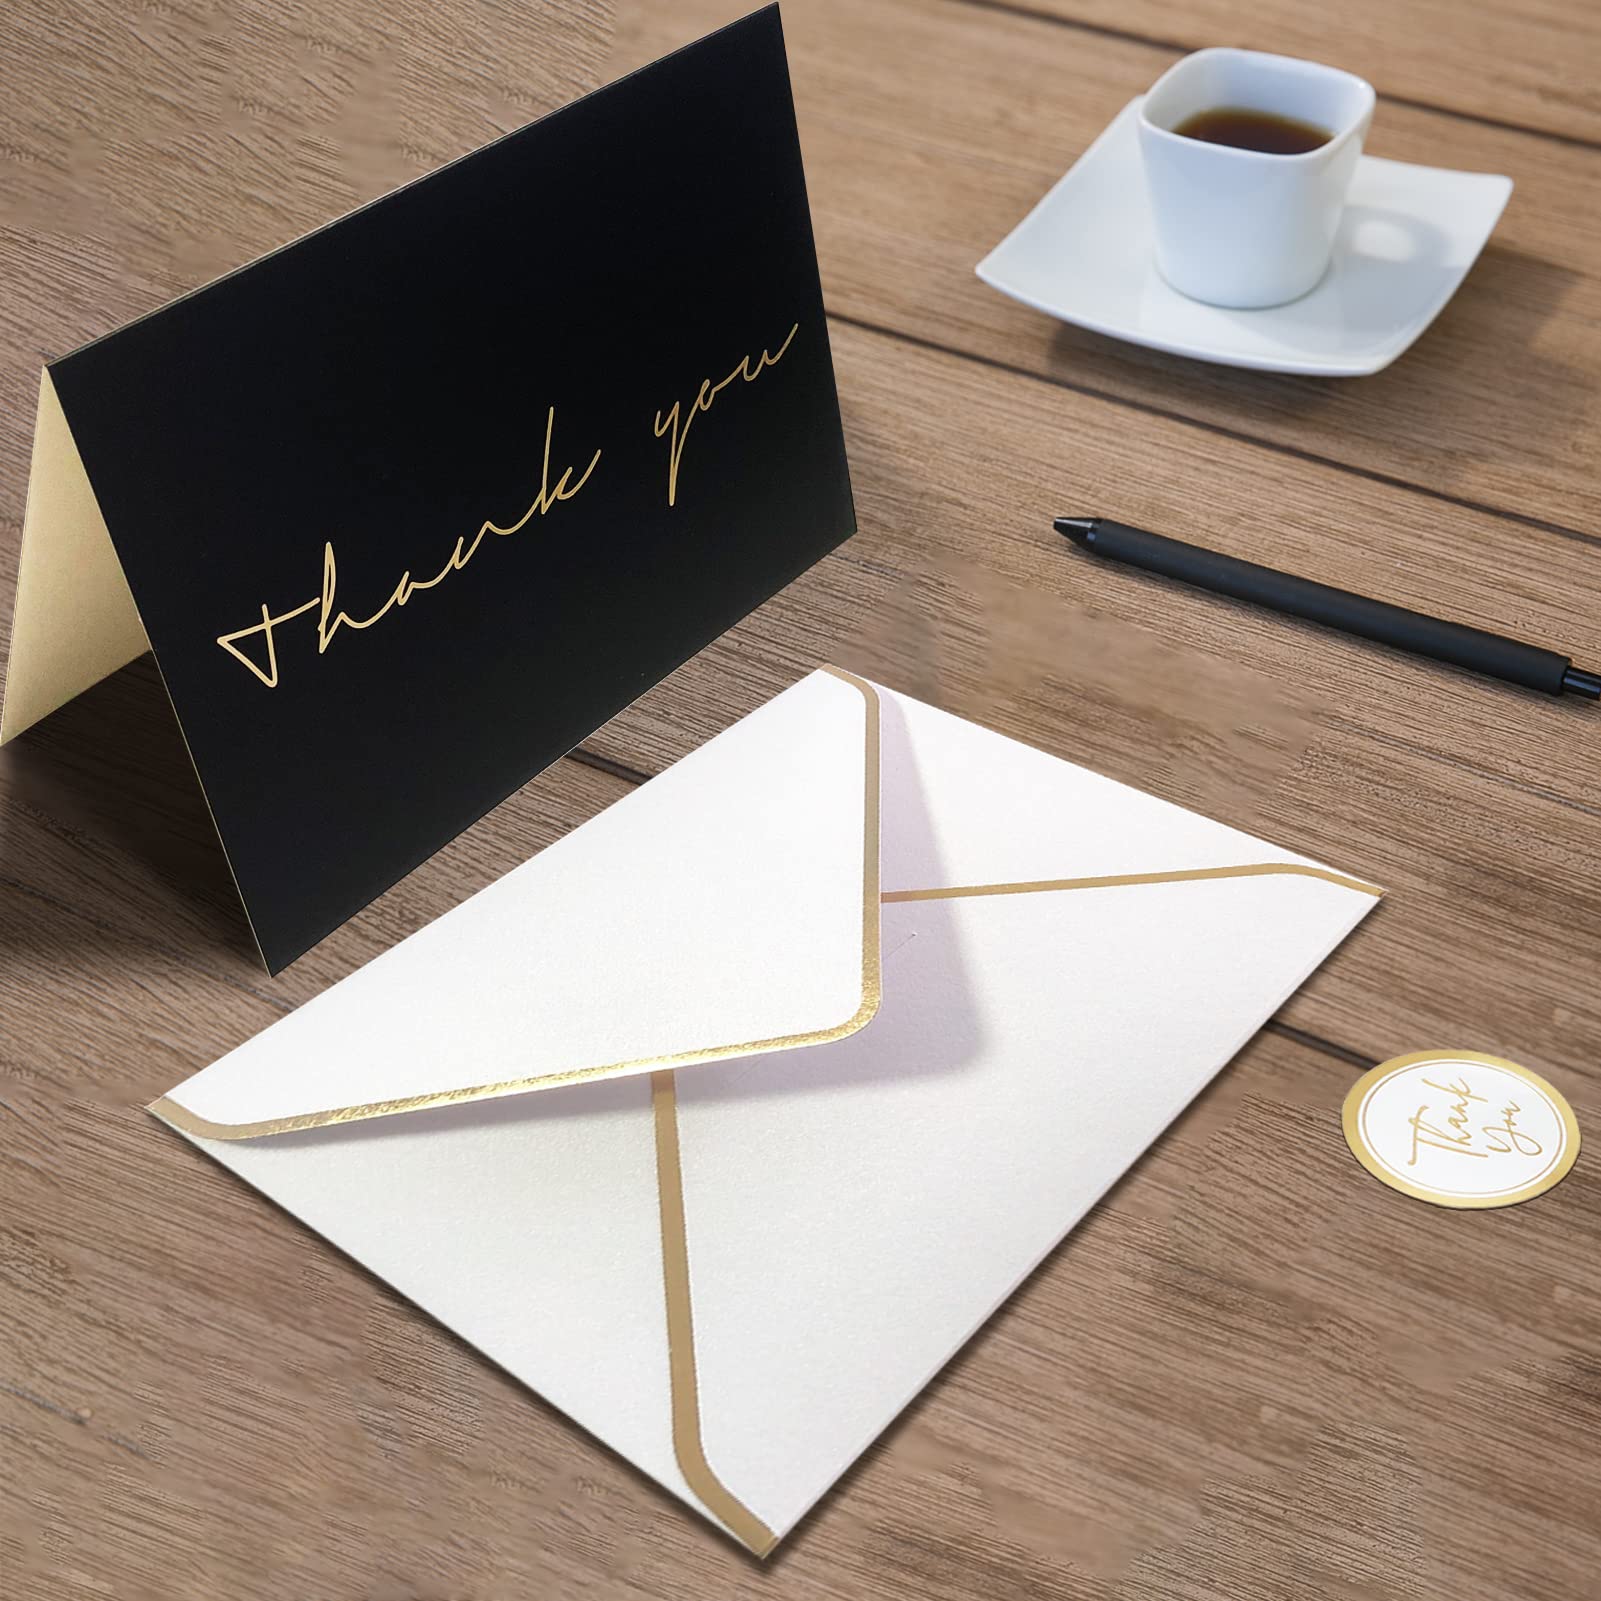 40 Thank You Cards, Black and Gold Foil Thank You Cards Bulk, All Occasions Thank You Note Card with Envelopes & Stickers, Wrapped with Sturdy Box, Great for Wedding, Baby Shower, Bridal Shower, Etc -